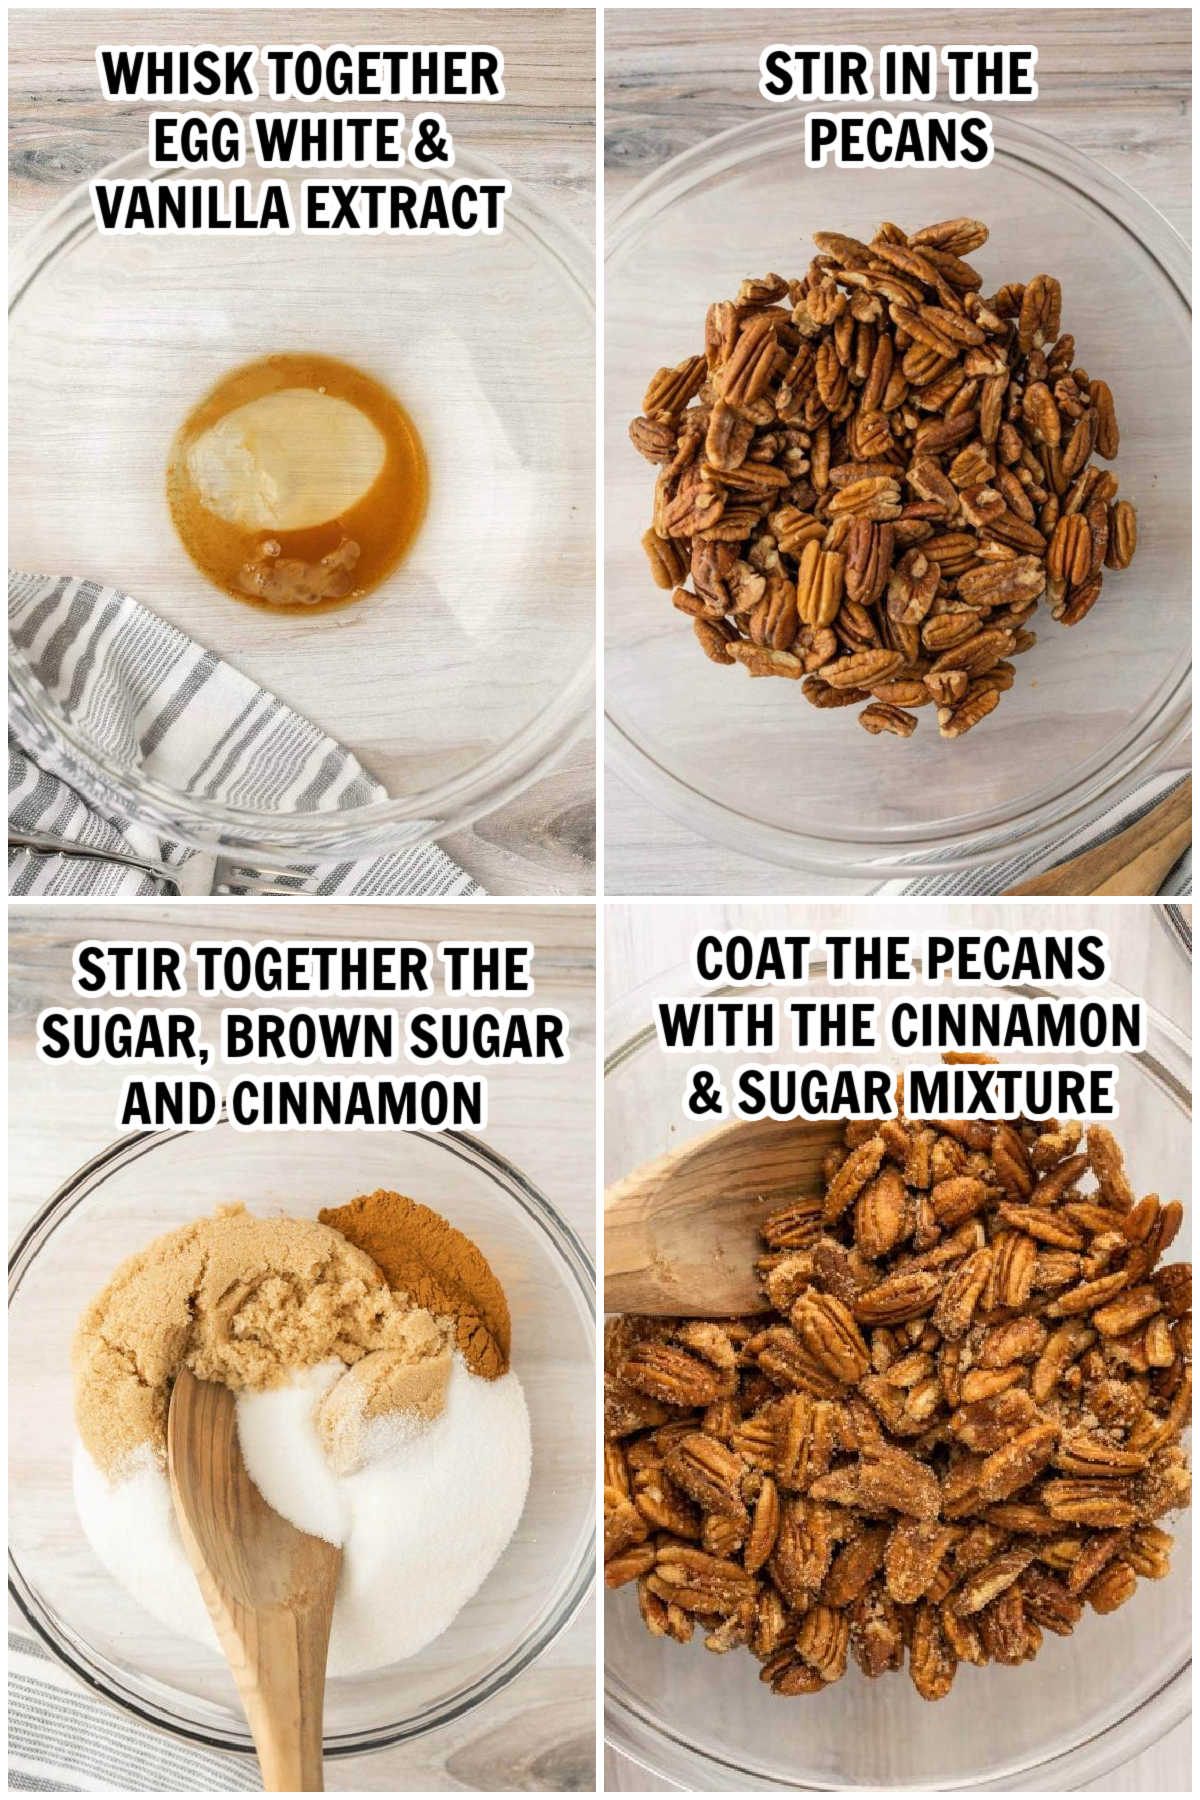 The process of mixing the ingredients with the pecans